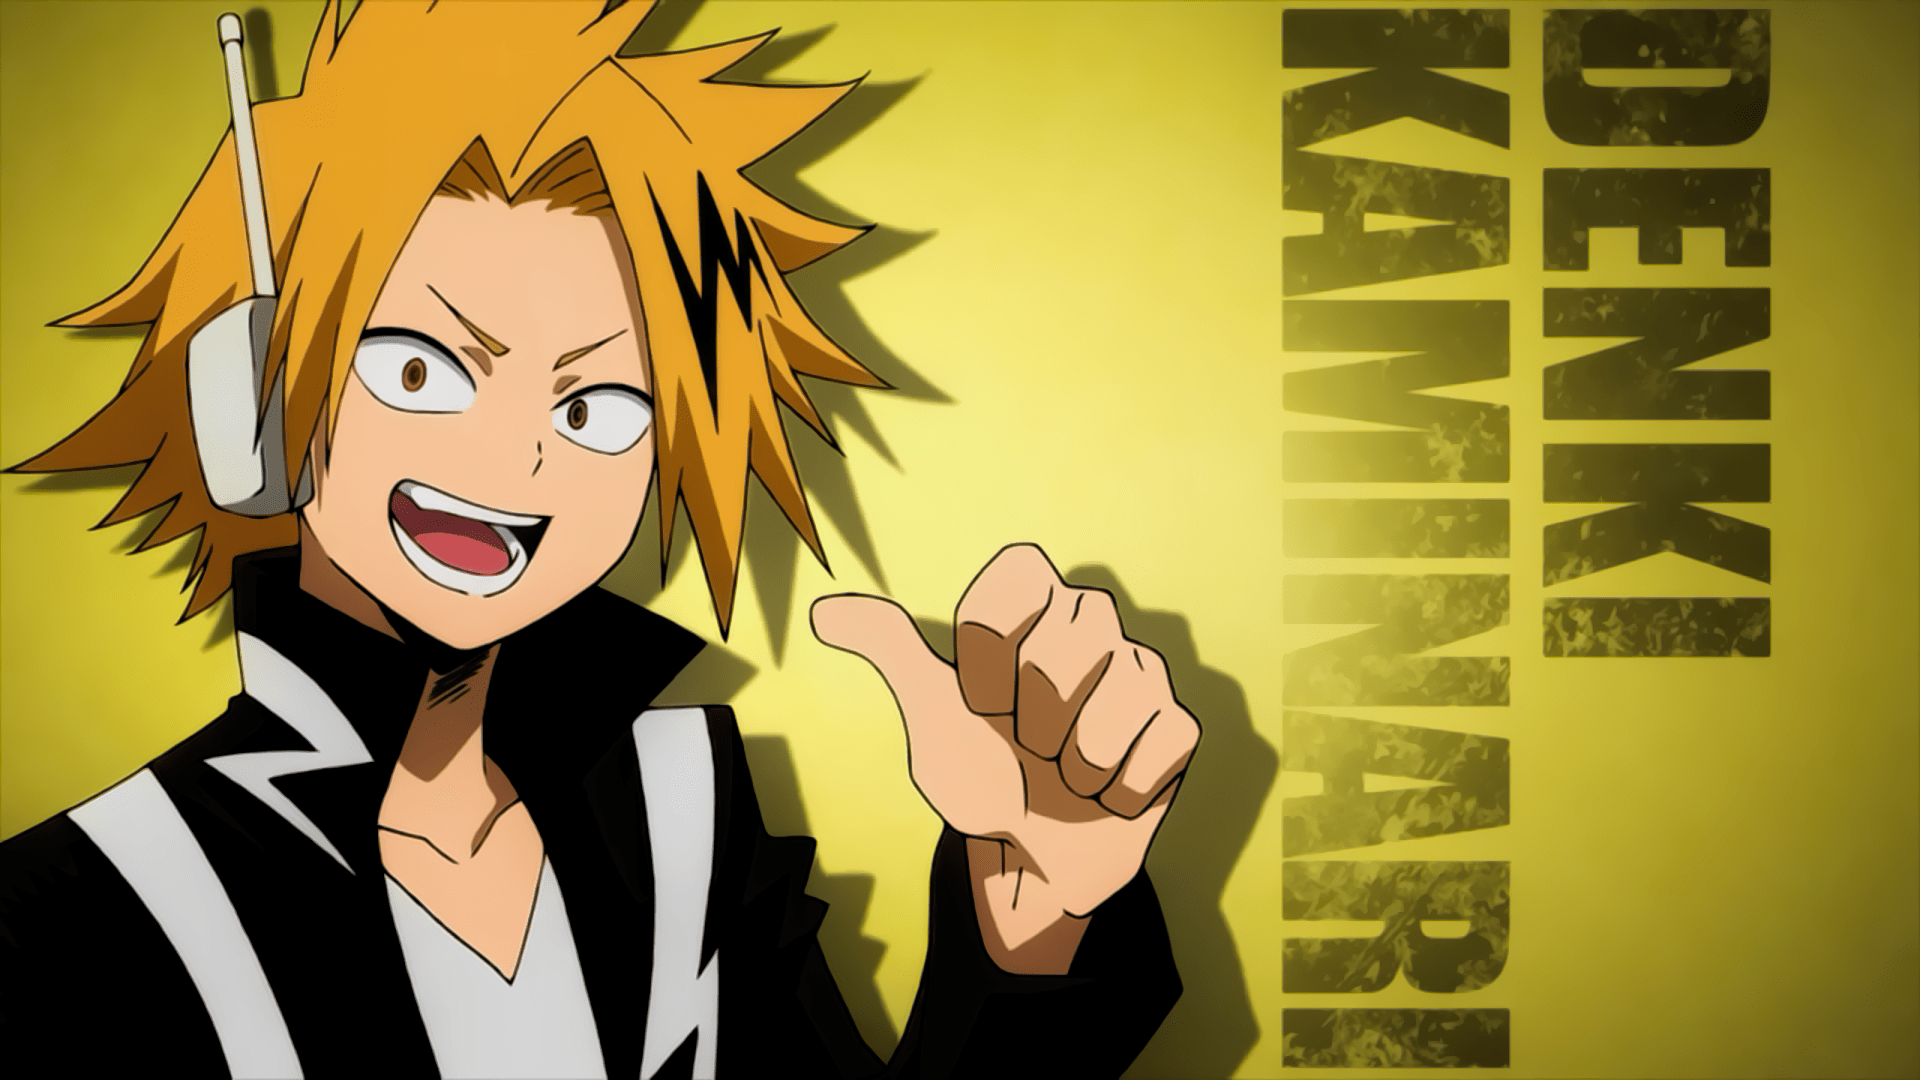 A wallpaper of Denki pointing to the right with his left hand. - Denki Kaminari